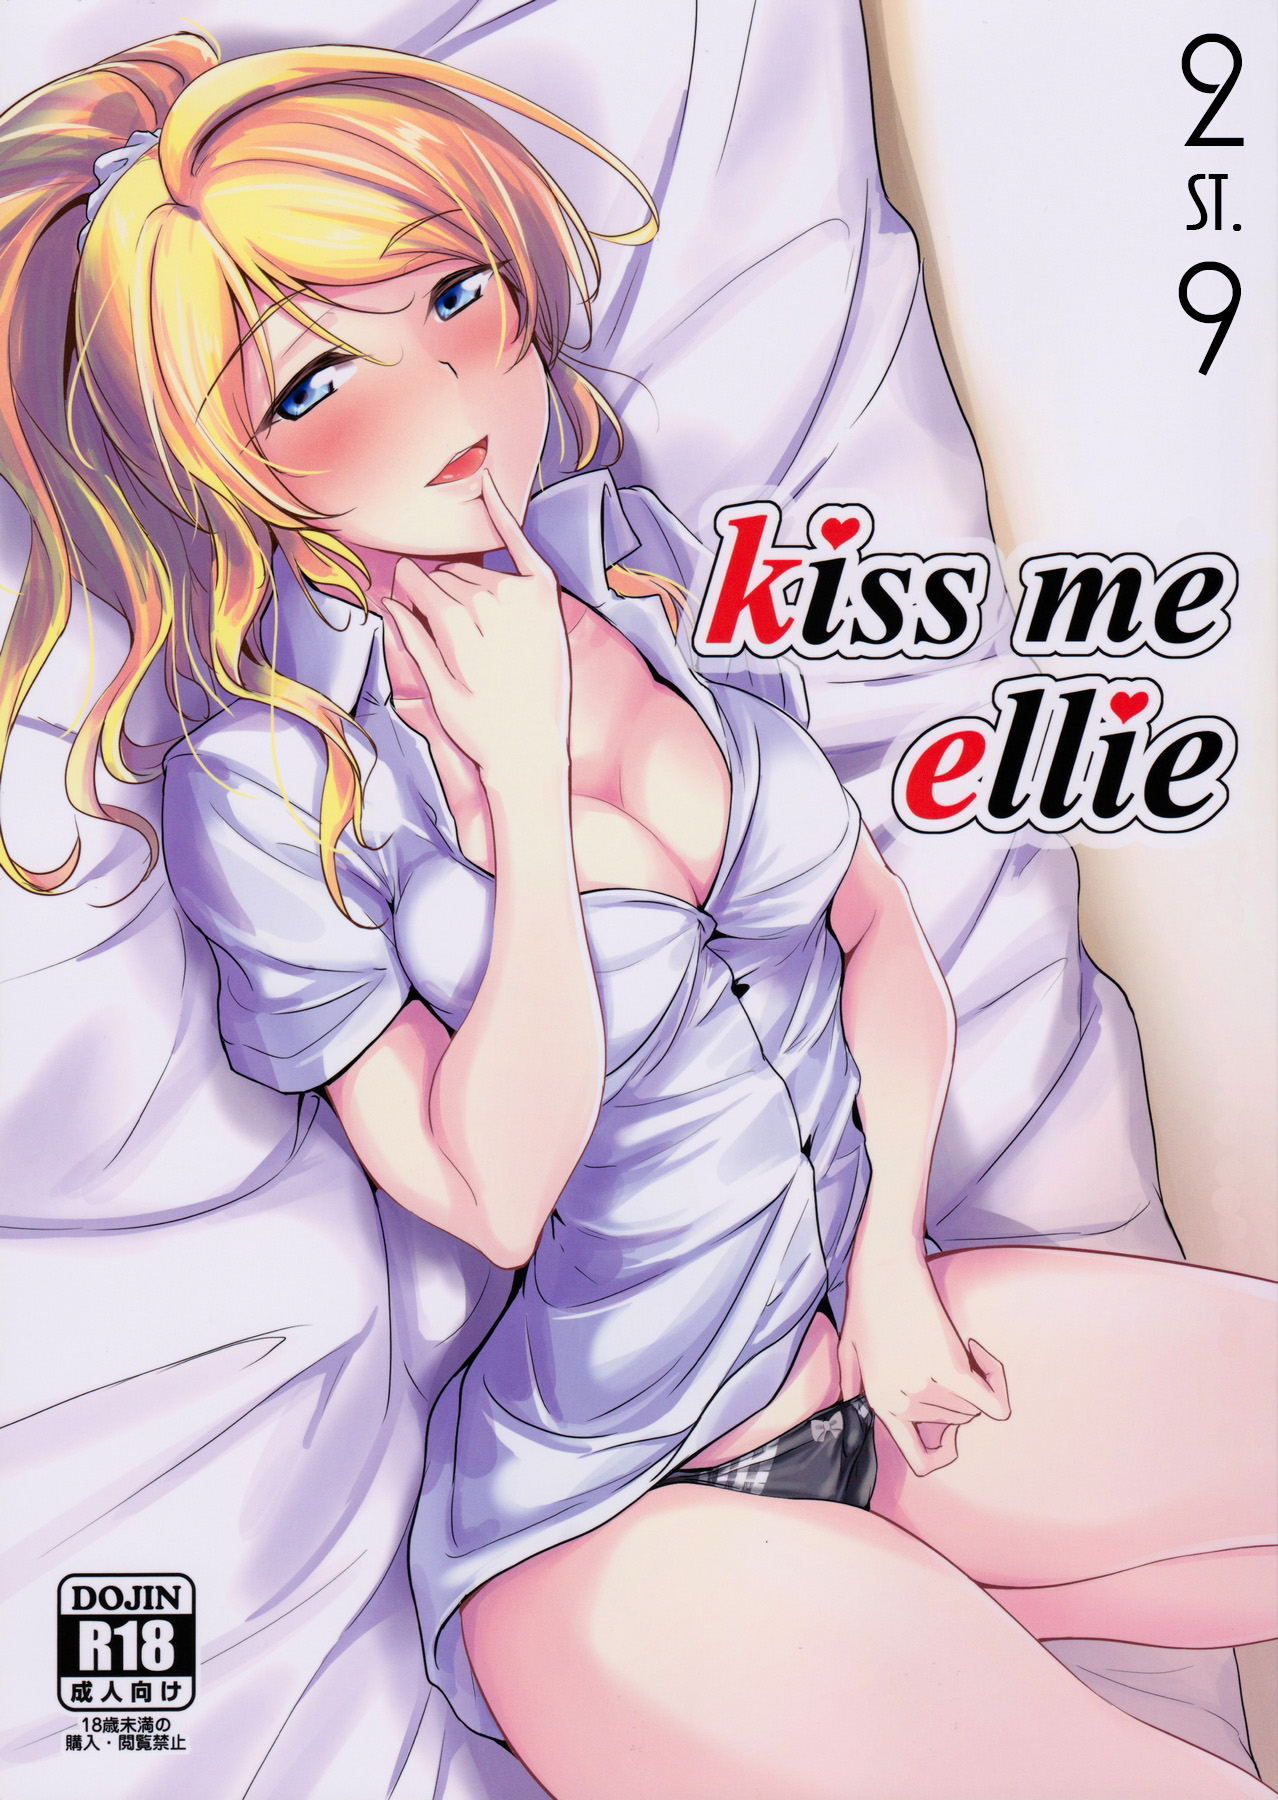 (C90) [Nuno no Ie (Moonlight)] kiss me ellie (Love Live!) [Chinese] [st.] page 1 full